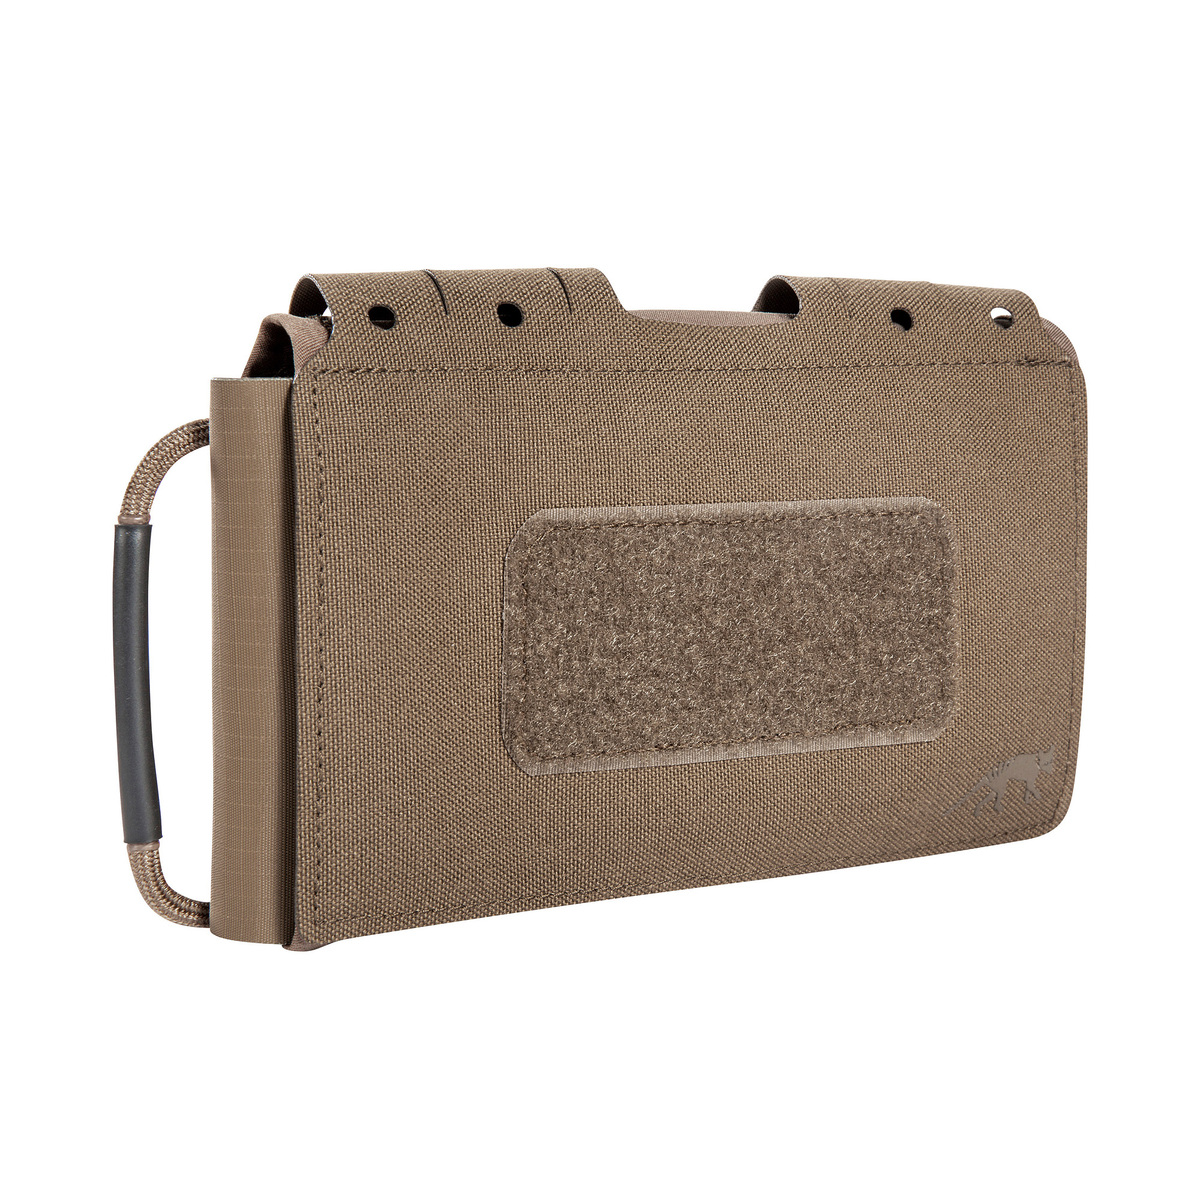 IFAK Pouch Dual Coyote brown, One Size